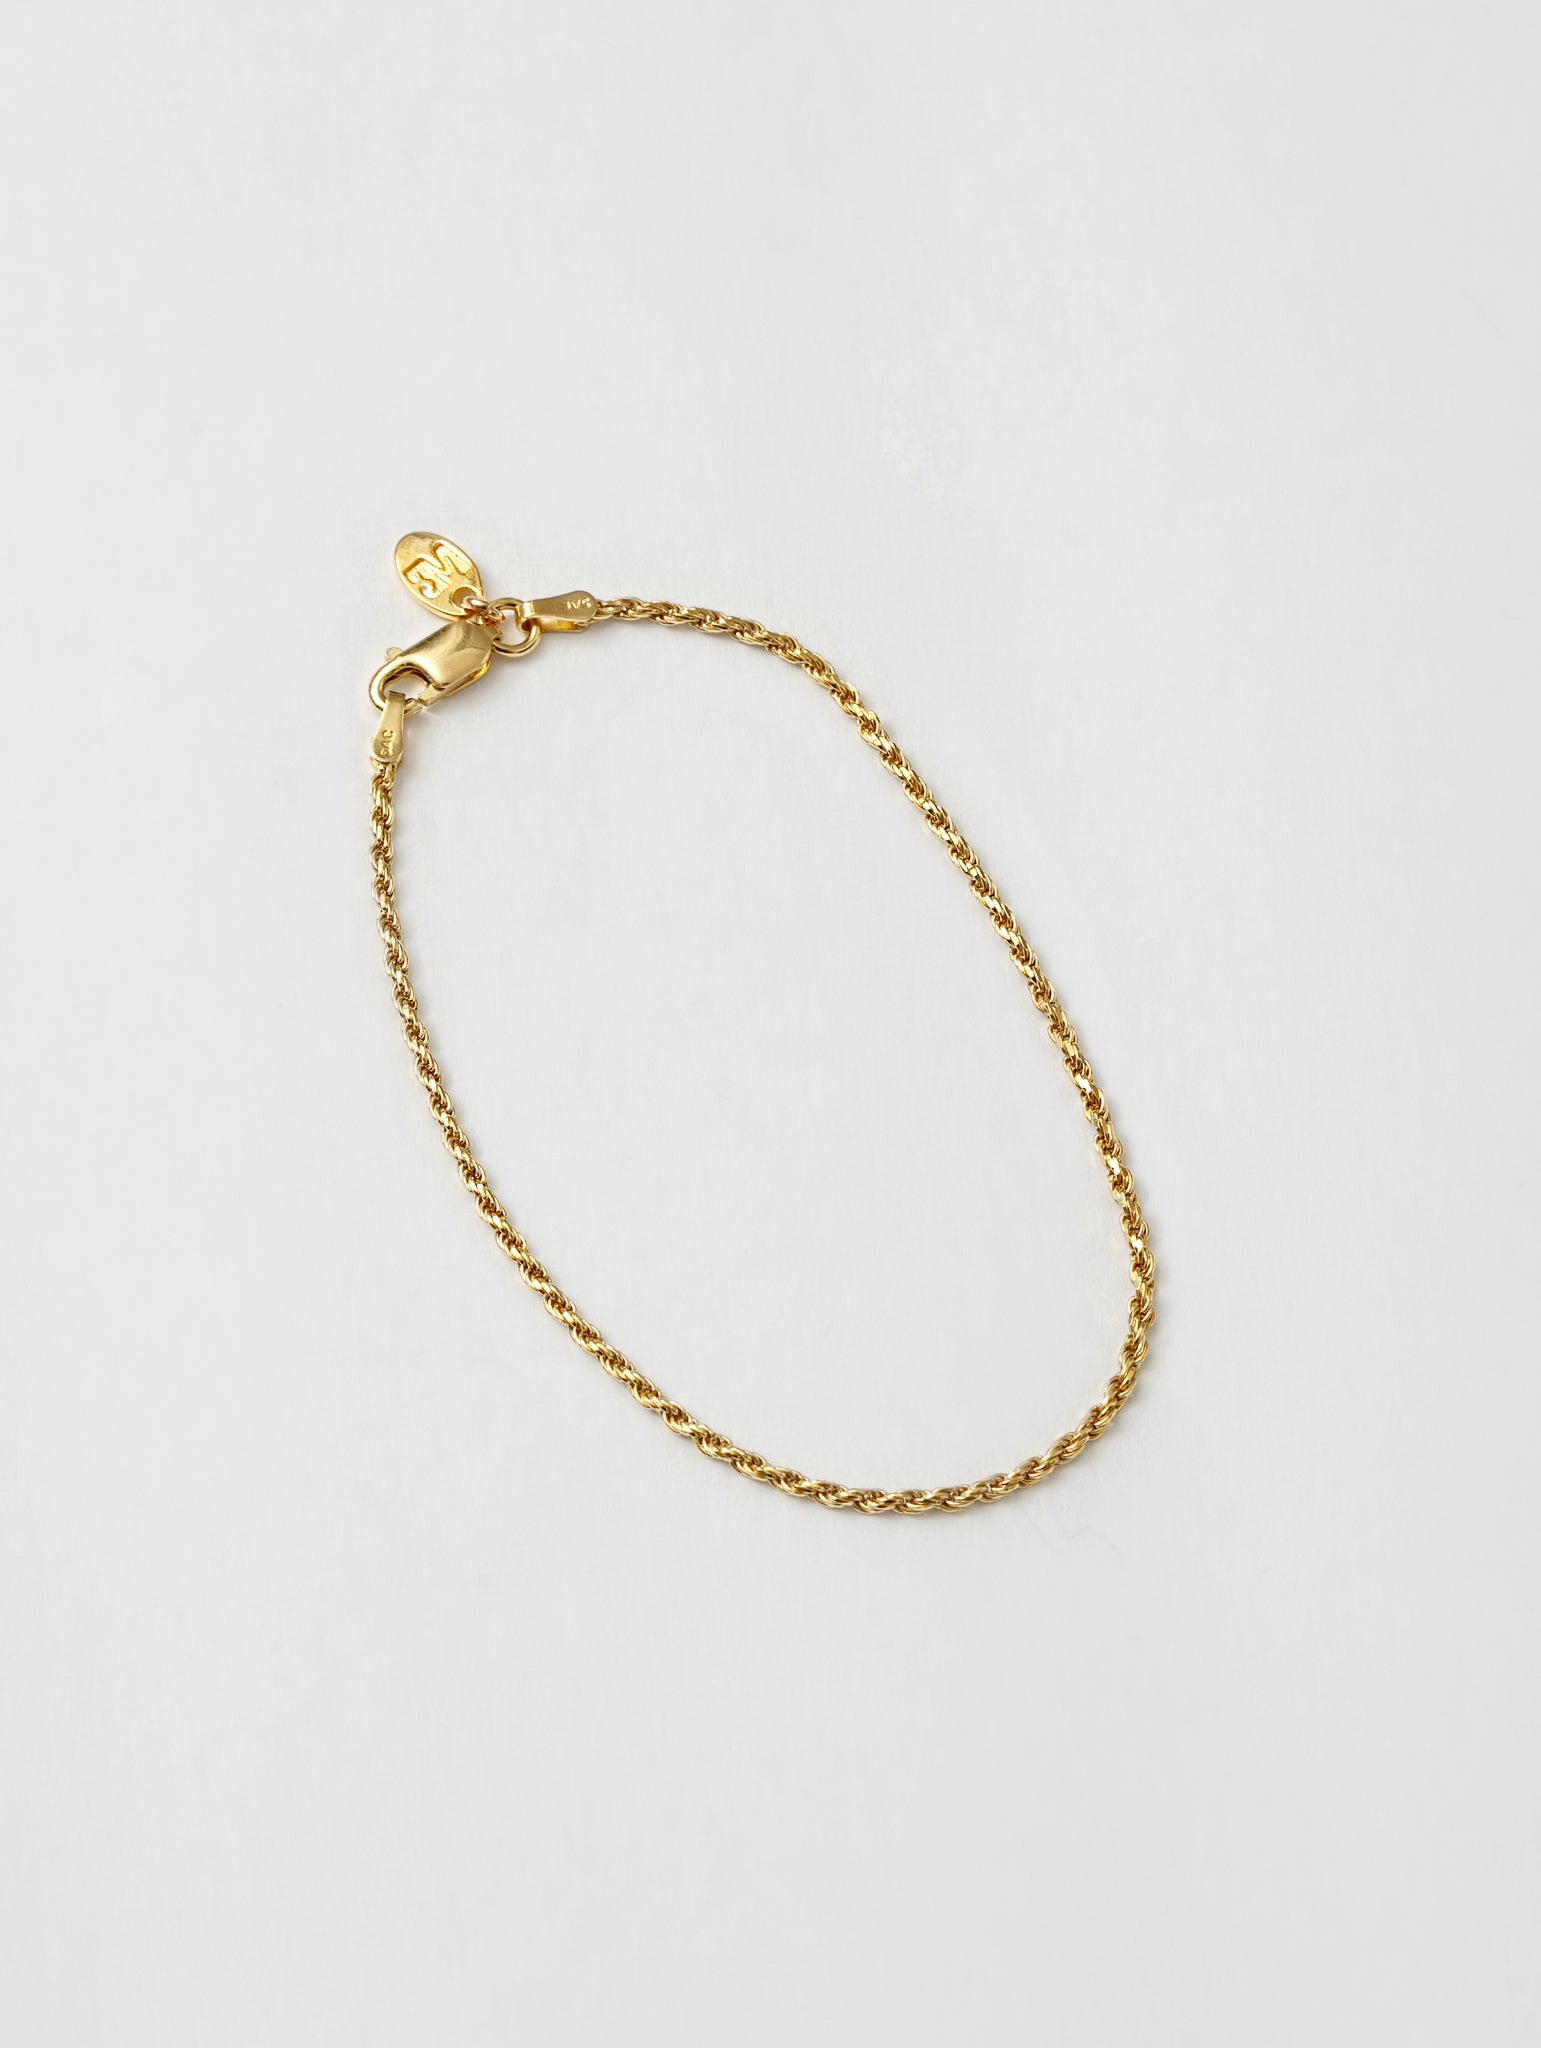 Wolf Circus Rope Chain Bracelet in 14k Gold Vermeil | Adele Bracelet in Gold-Bracelets-wolfcircus.com